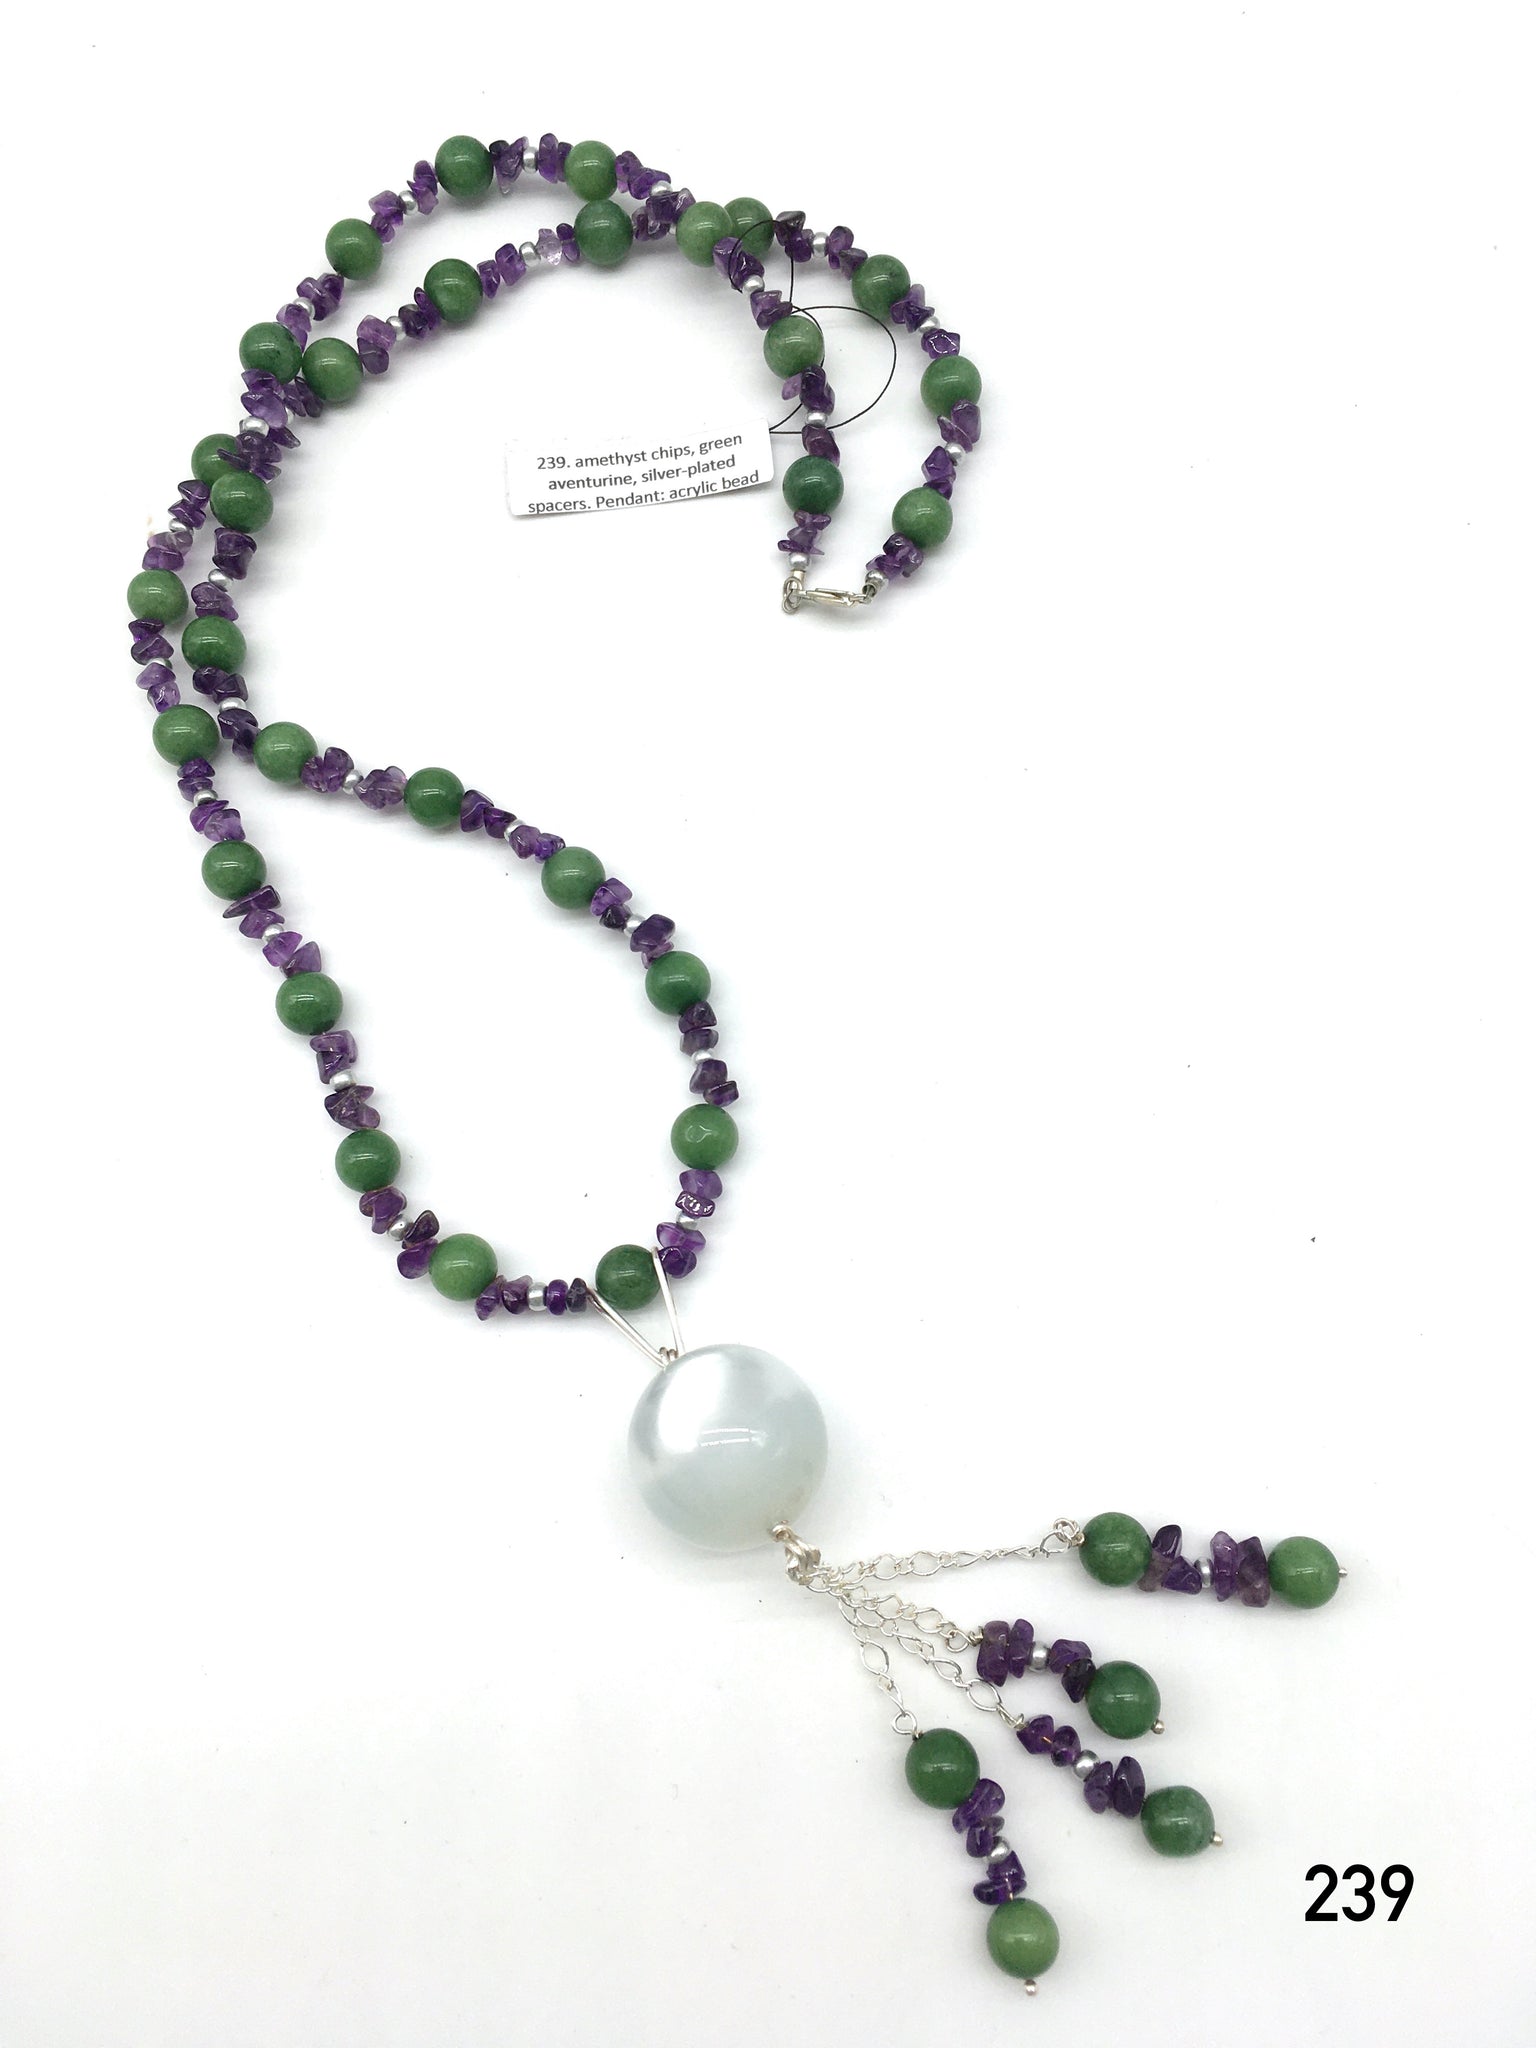 Amethyst chips, green aventurine, silver-plated spacers. Pendant acrylic bead 